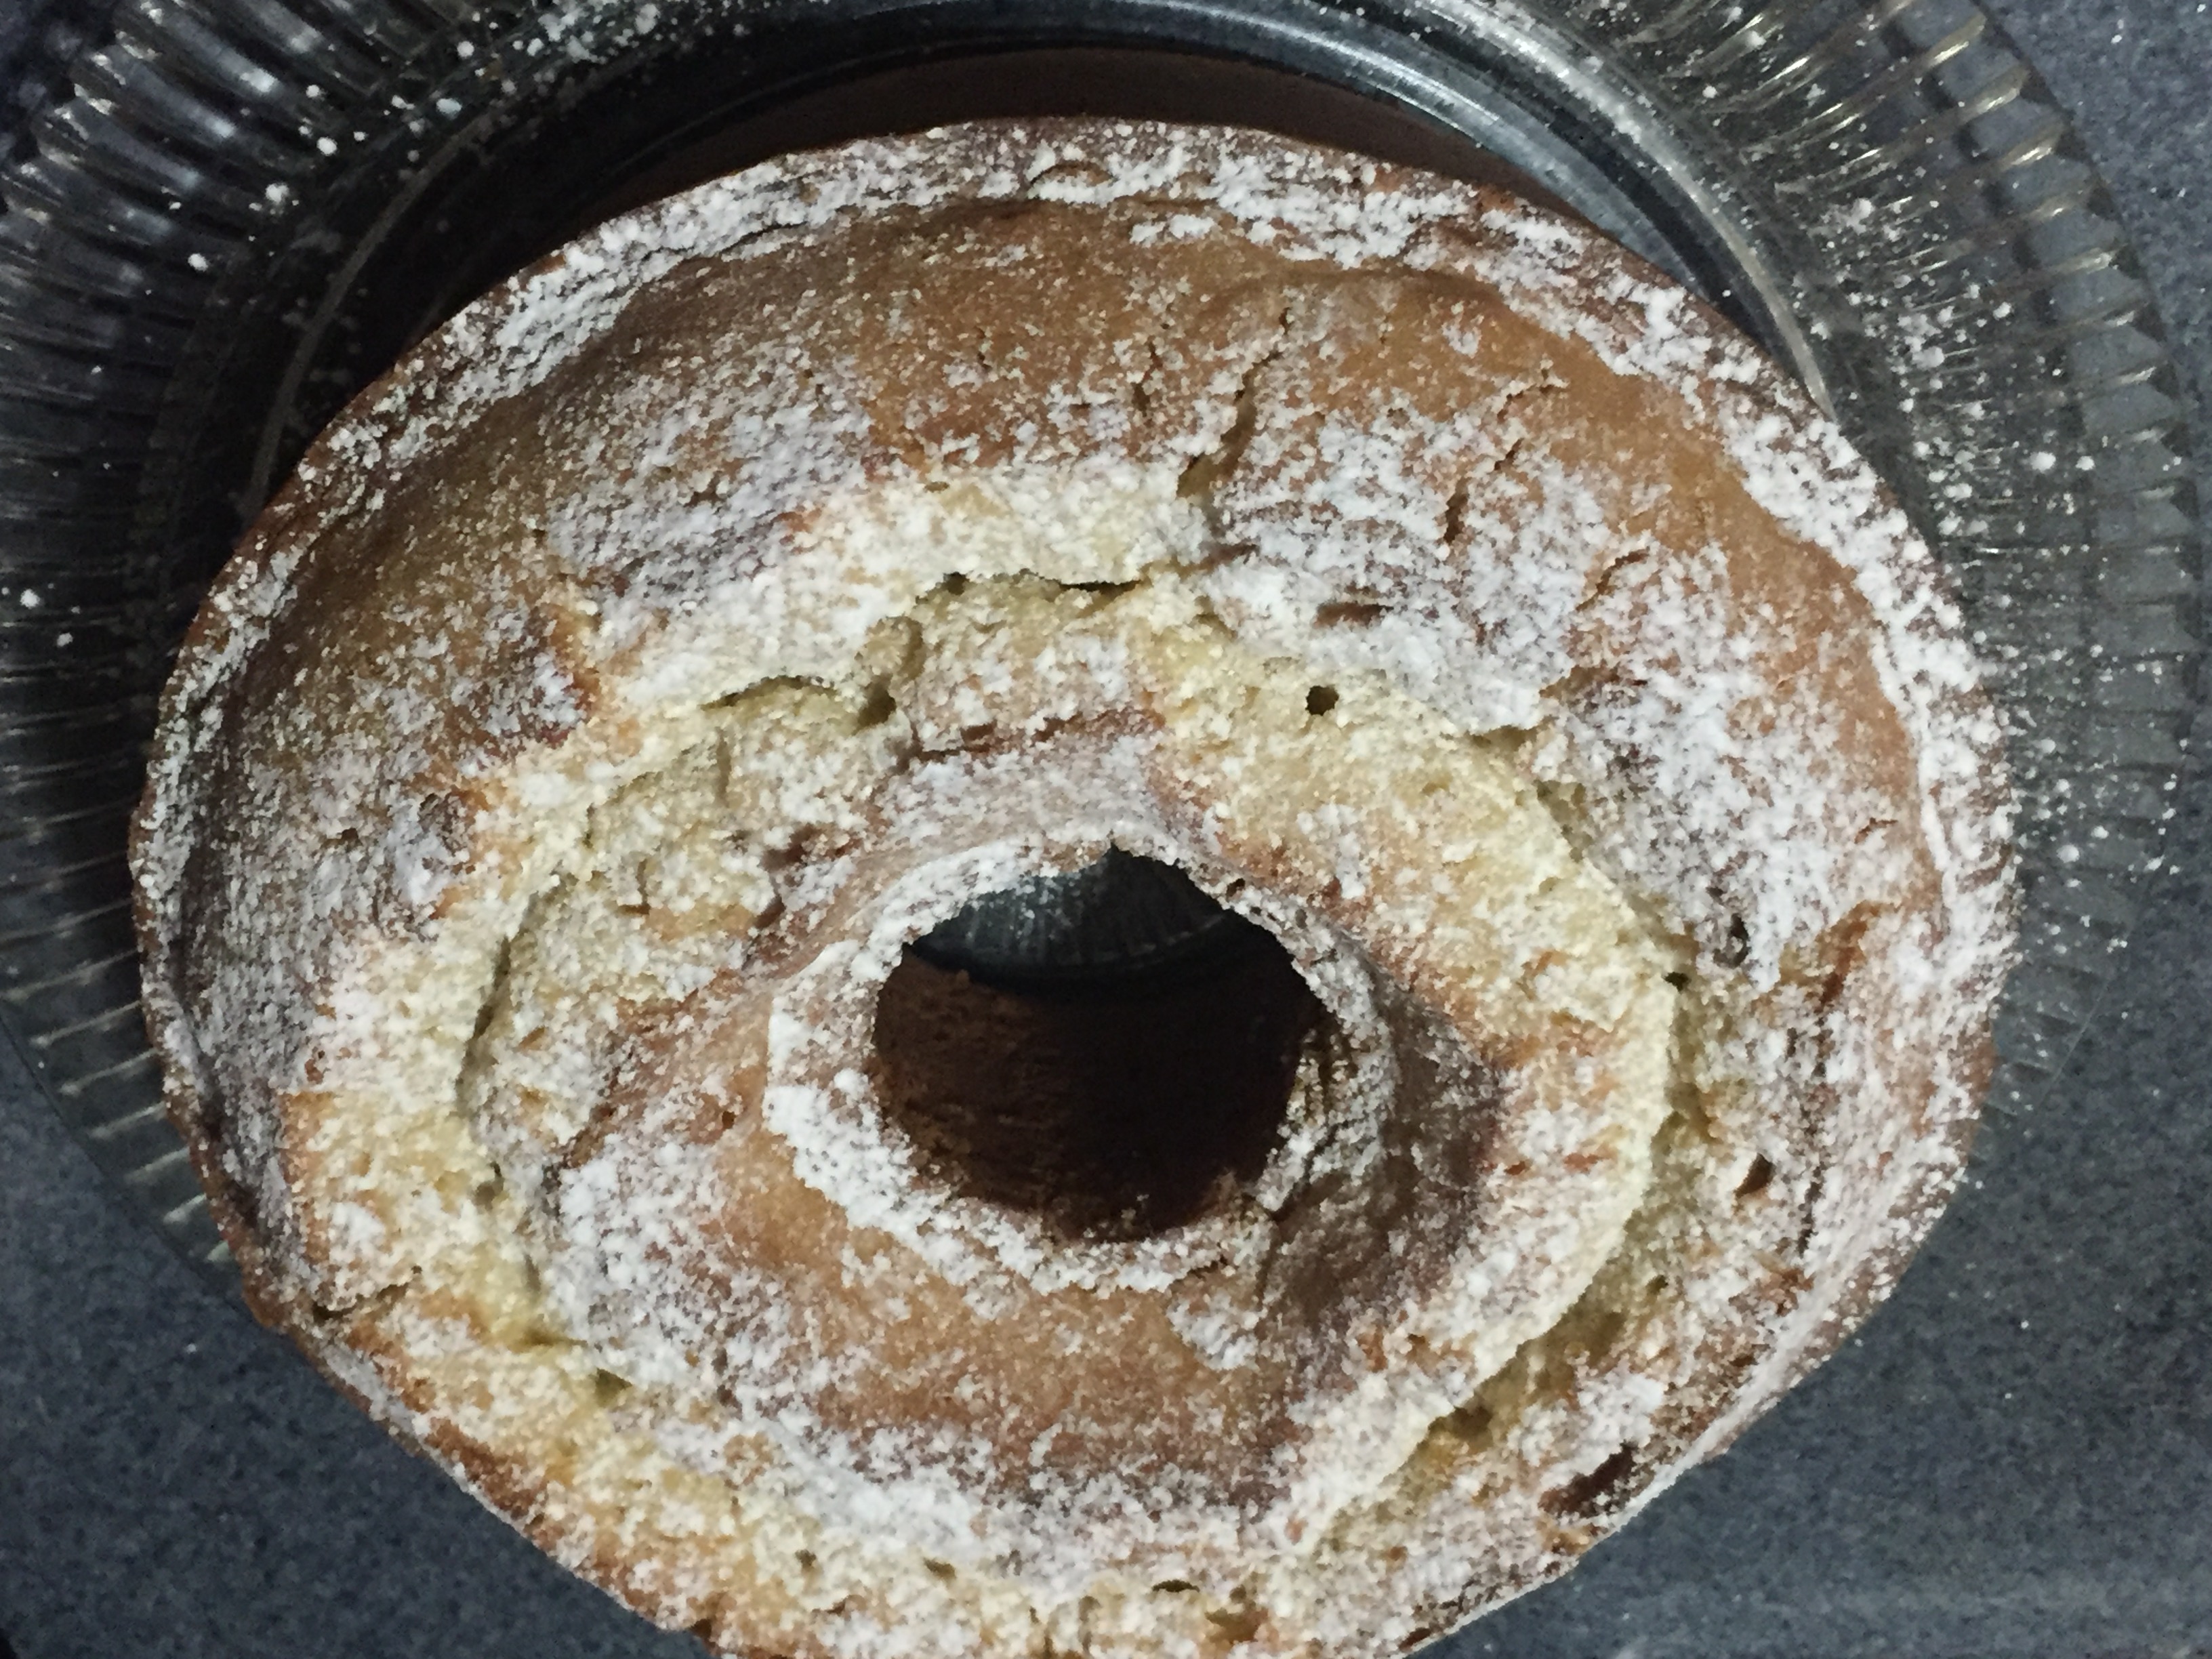 A round cream cake with a hole in its center sprinkled with powdered sugar set on a round glass platter.